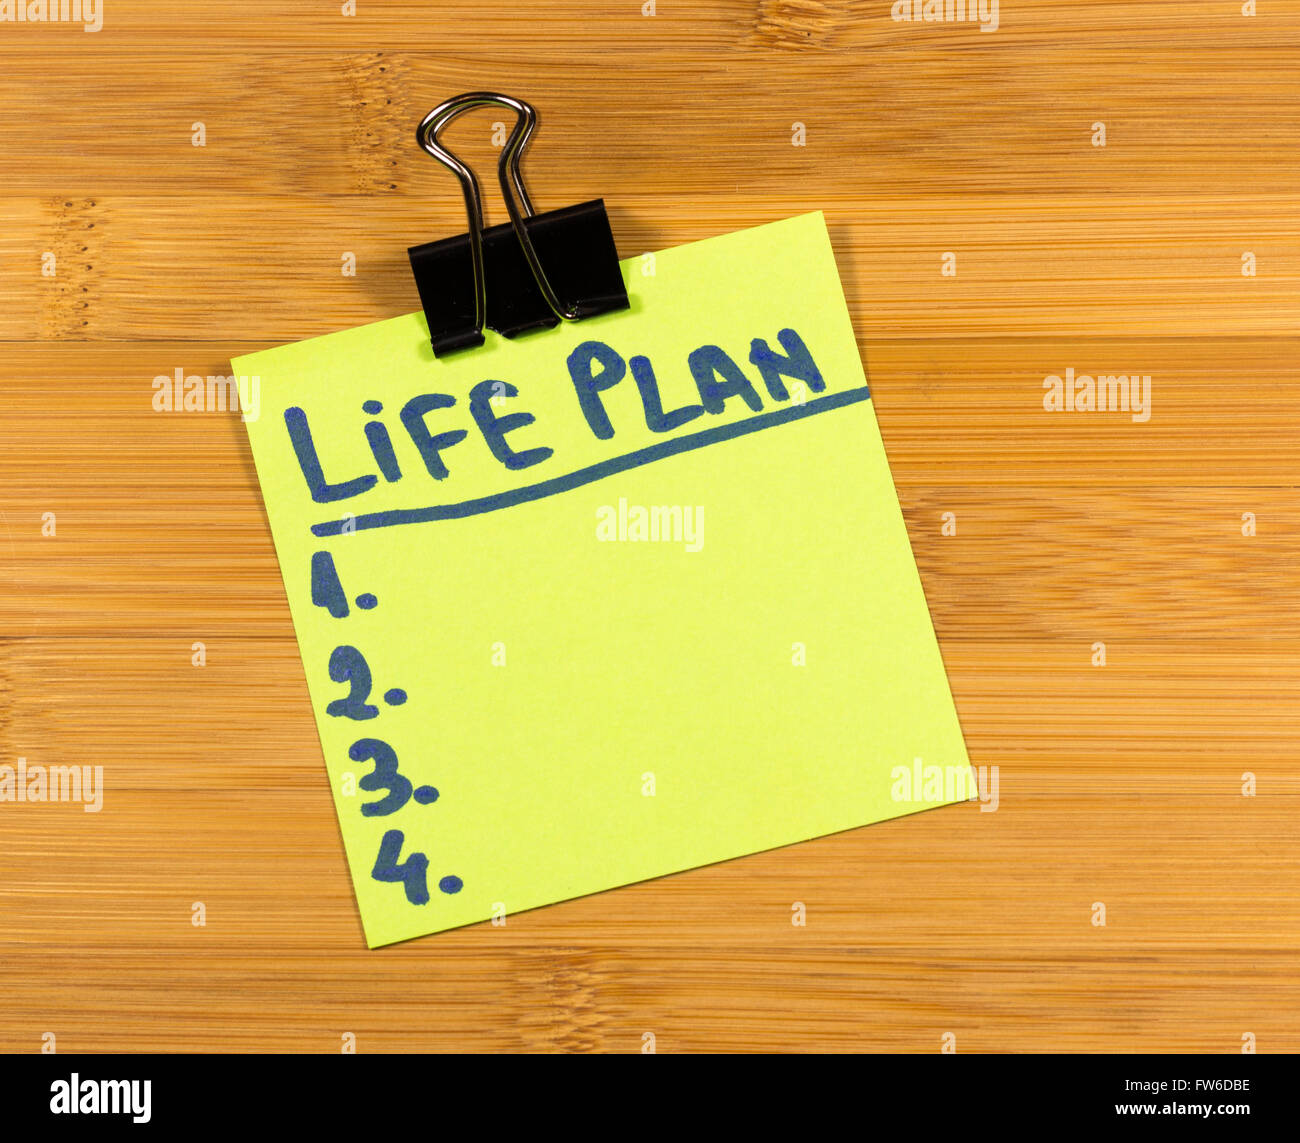 life plan sticky note on wooden background Stock Photo